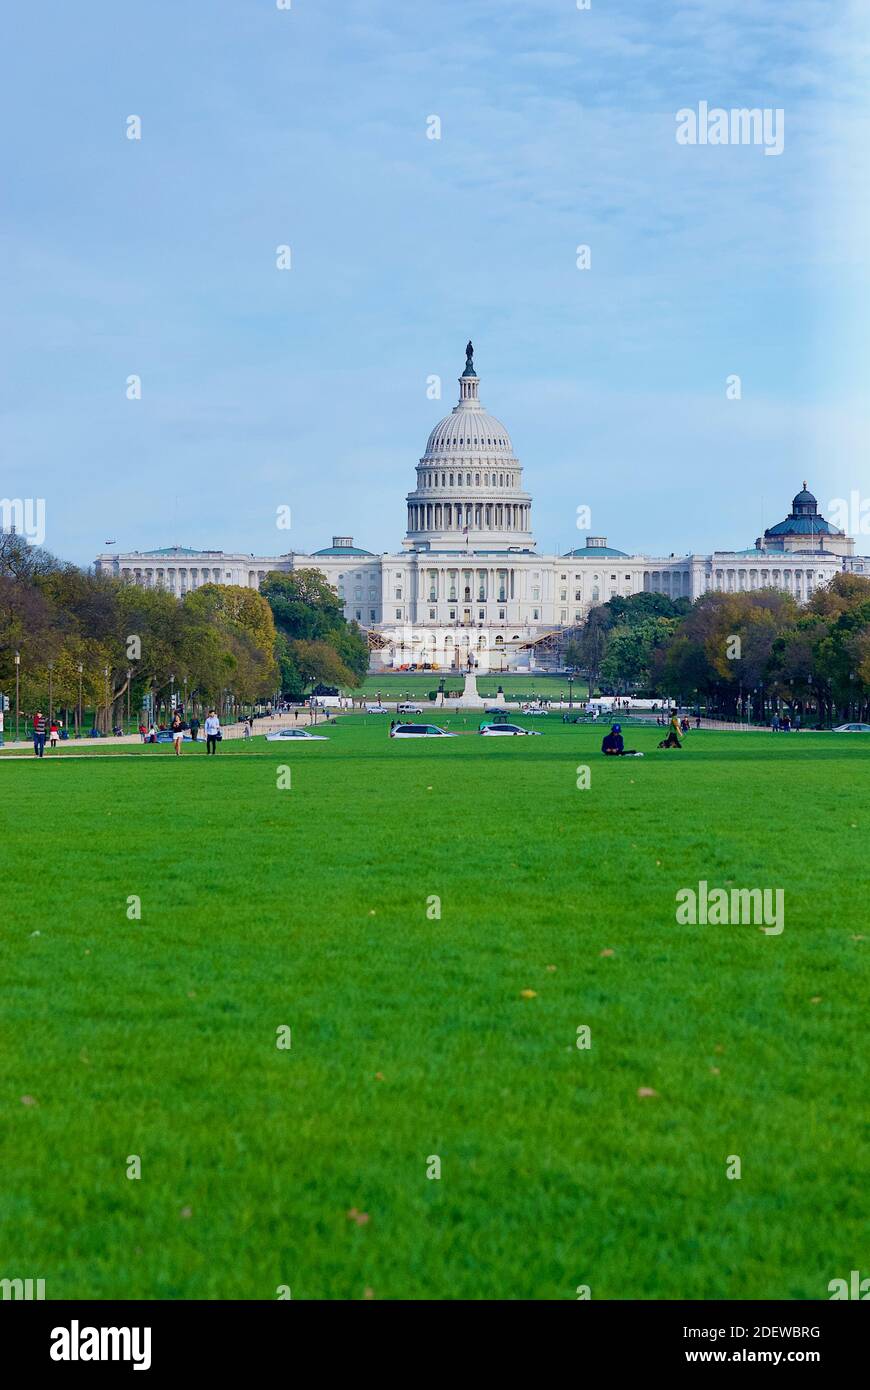 Washington, D.C. - November 3, 2020: Tourists enjoy an autumn afternoon on the National Mall with the United States Capitol building in the background. Stock Photo